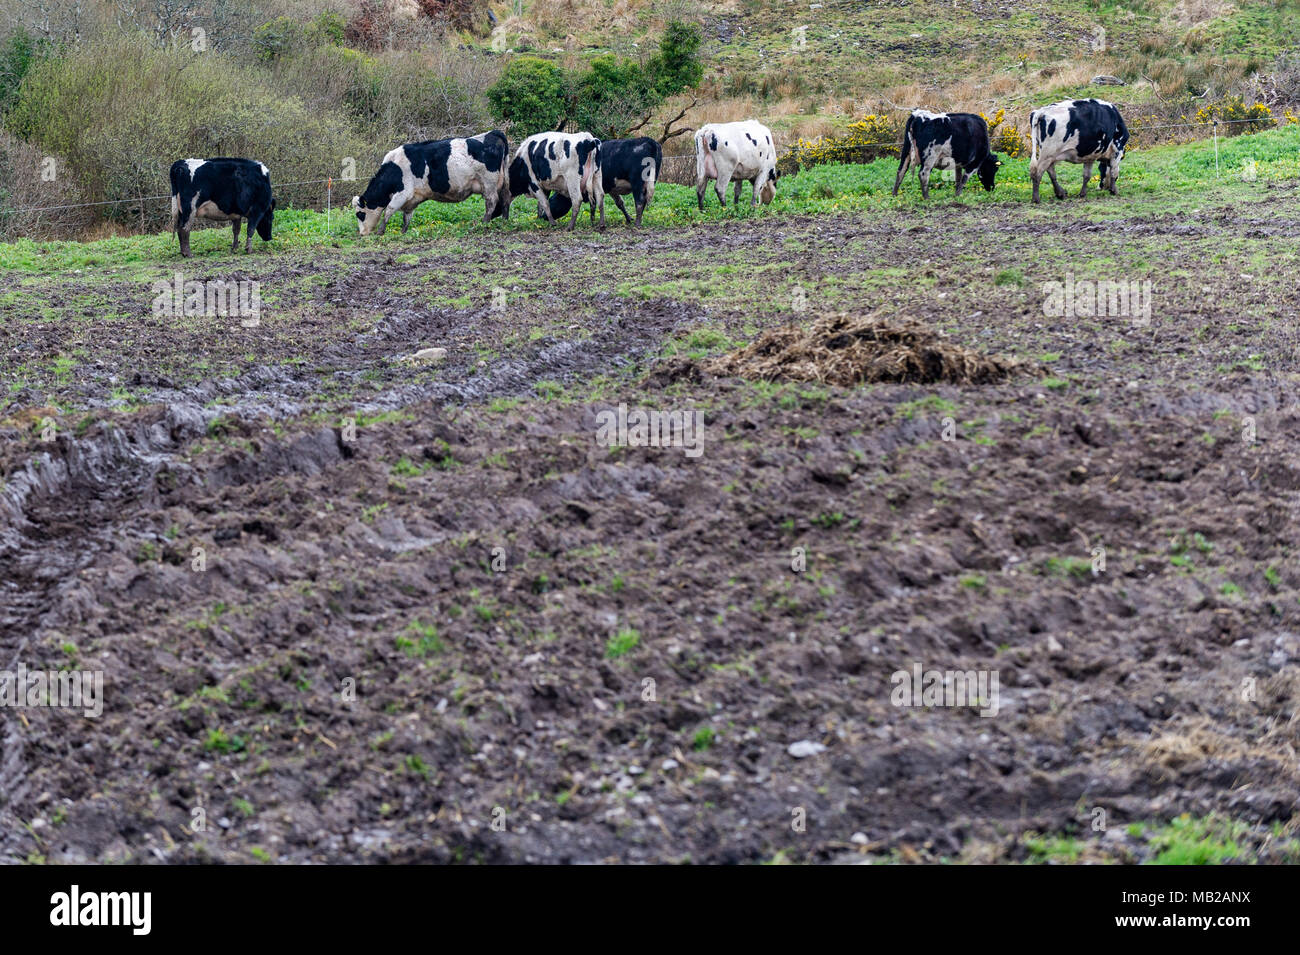 Ballydehob, Ireland. 6th Apr, 2018. A herd of dairy cows attempt to eat what little grass there is left in a field of mud, due to the ongoing fodder crisis in Ireland.  The poor weather has led to no grass growth with fodder having to be imported from the UK to help desperate farmers. Credit: Andy Gibson/Alamy Live News. Stock Photo